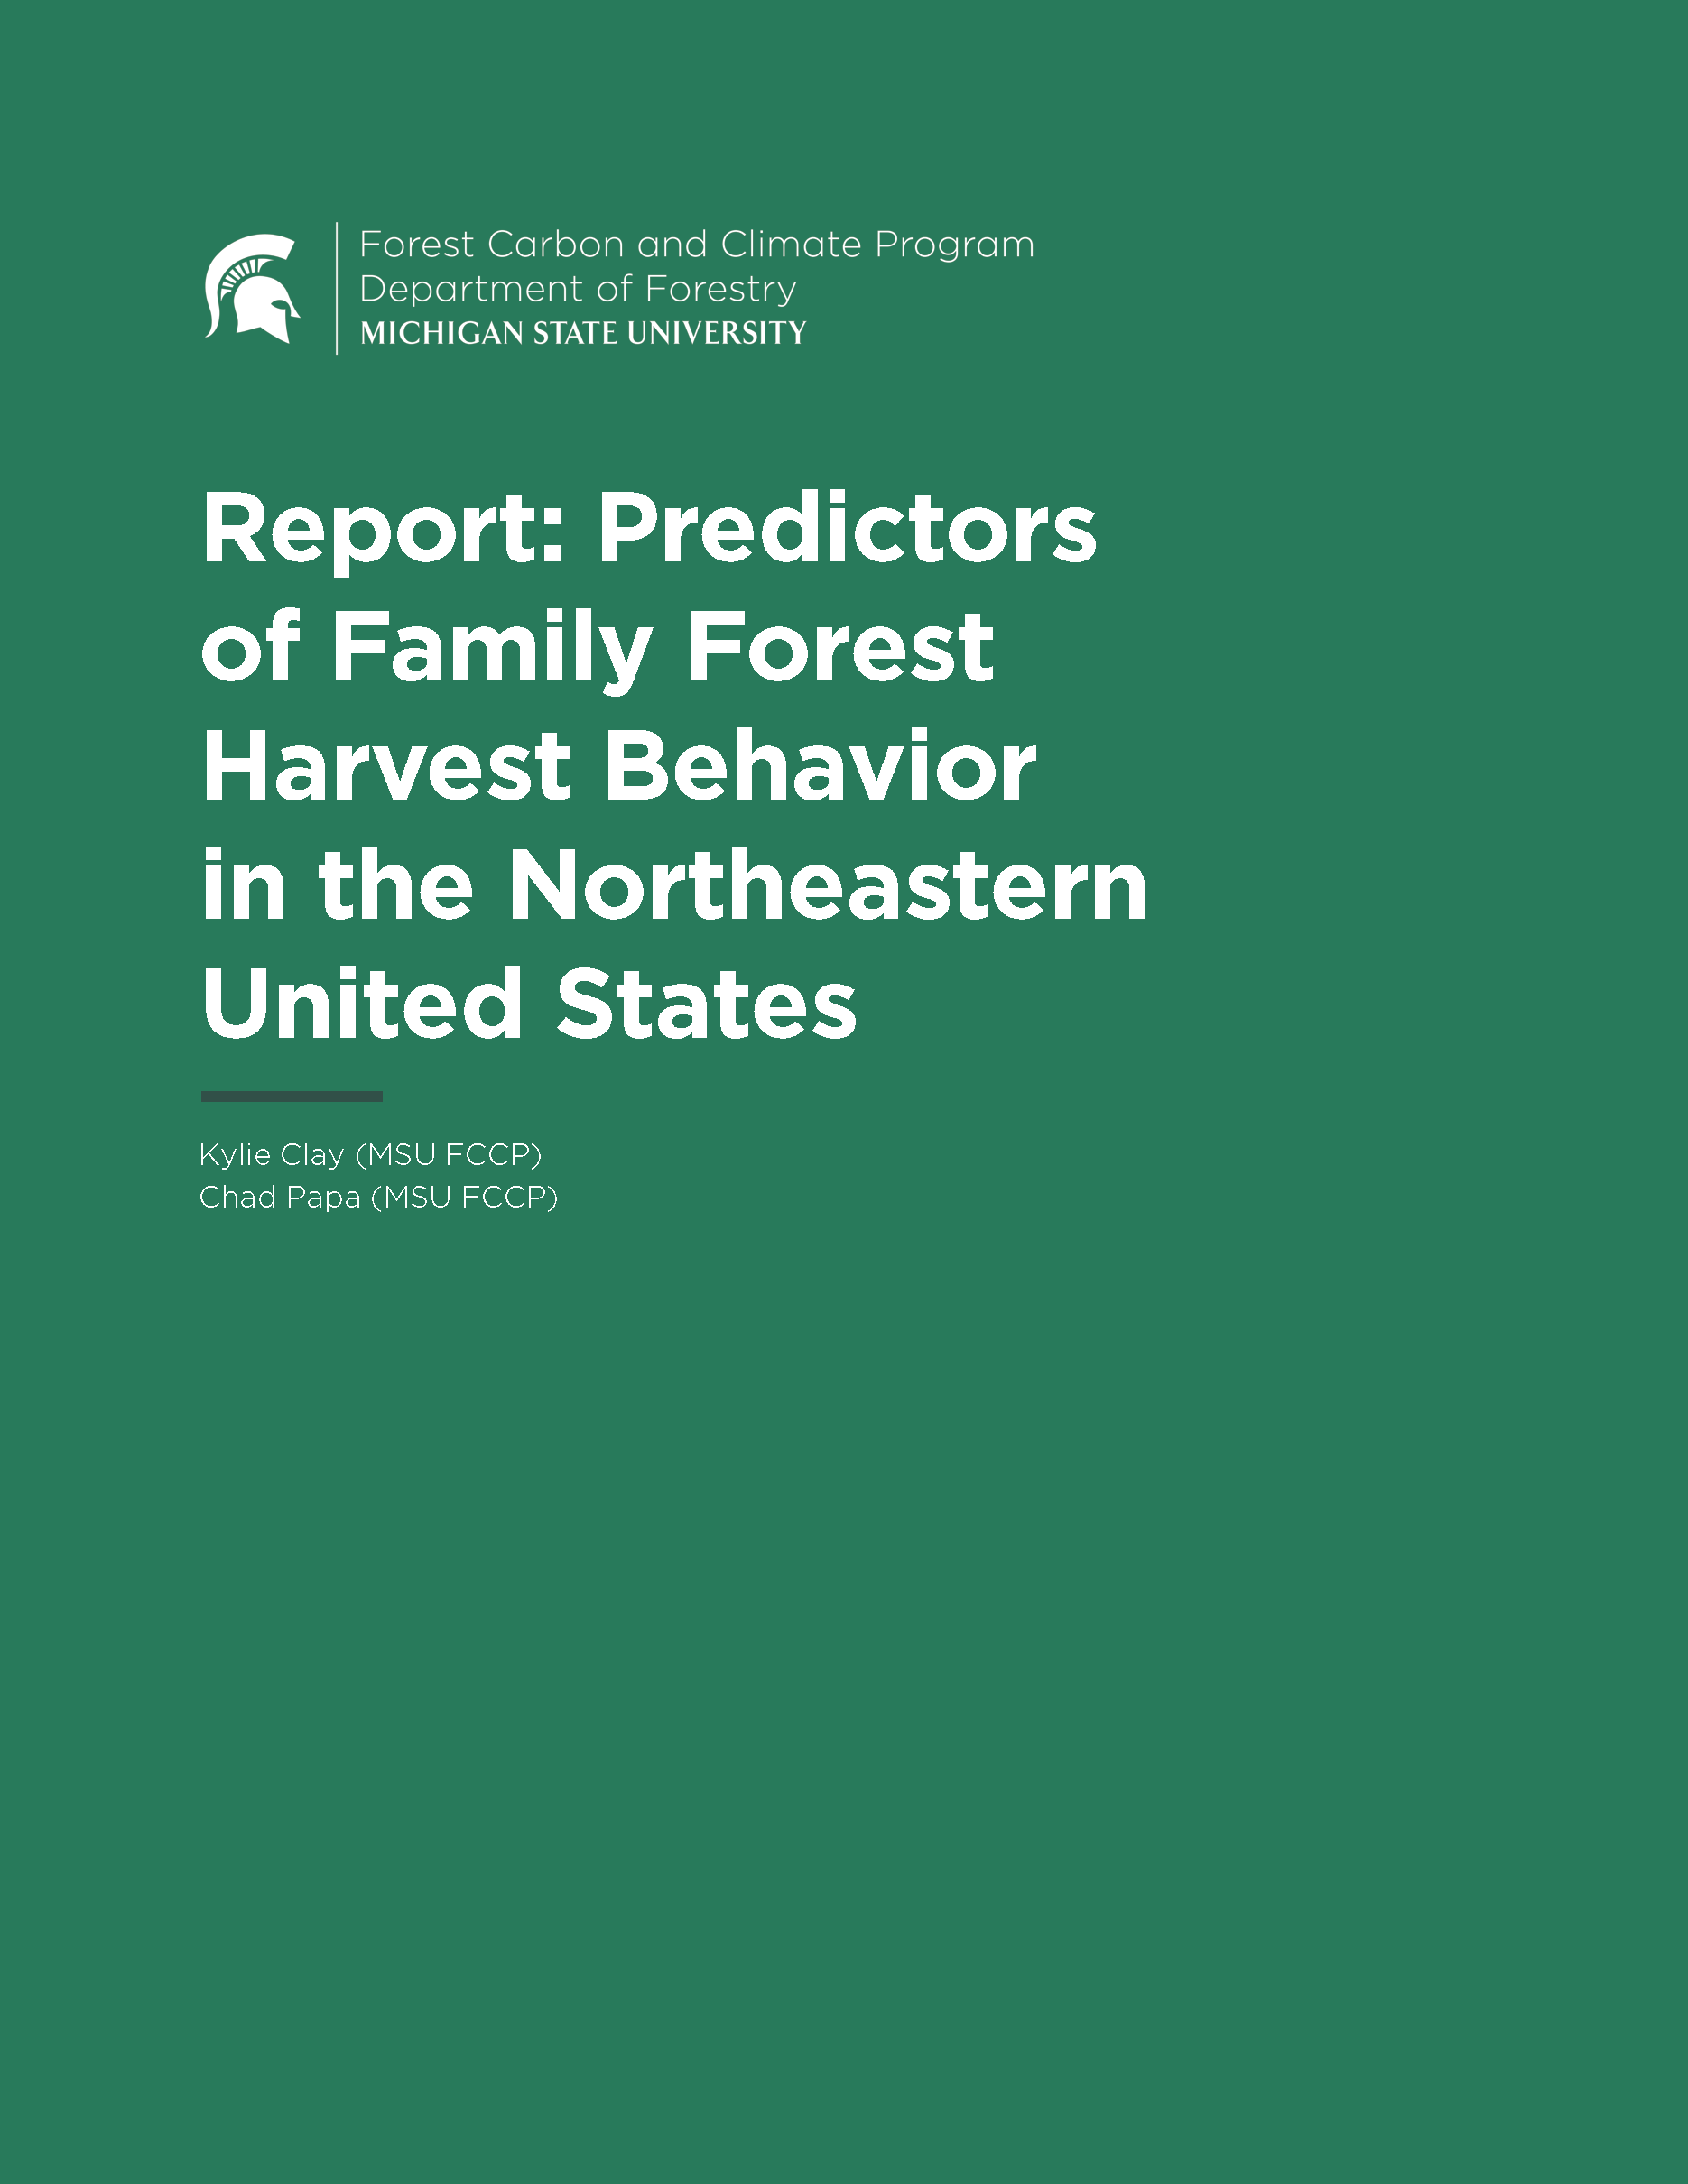 Report: Prediction of Family Forest Harvest Behavior in the Northeastern United States